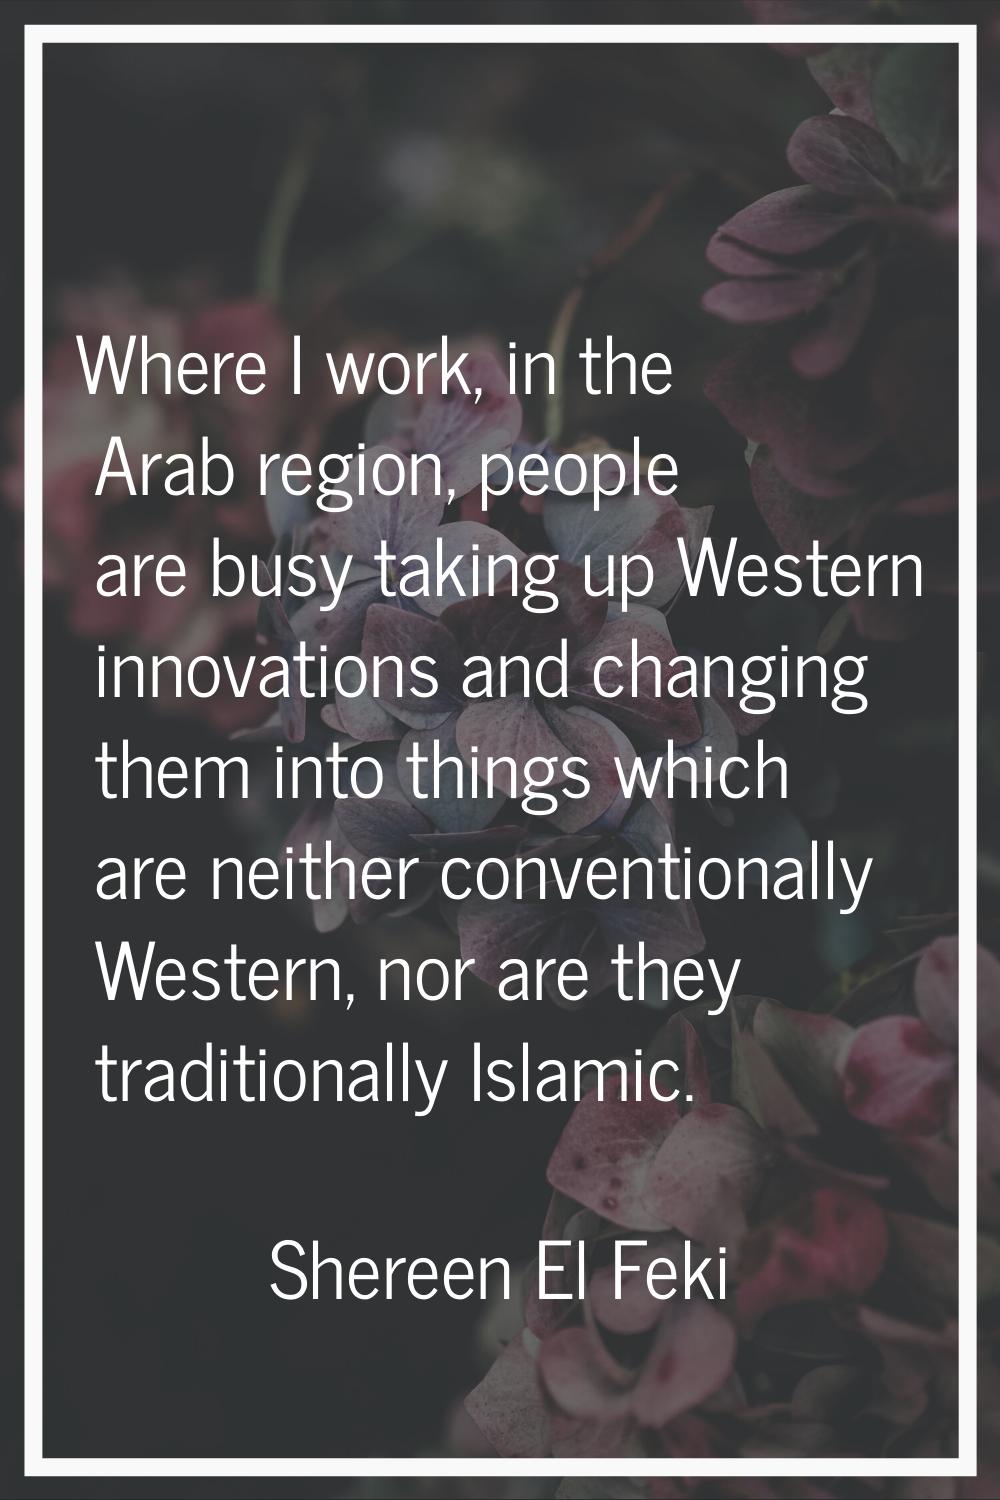 Where I work, in the Arab region, people are busy taking up Western innovations and changing them i